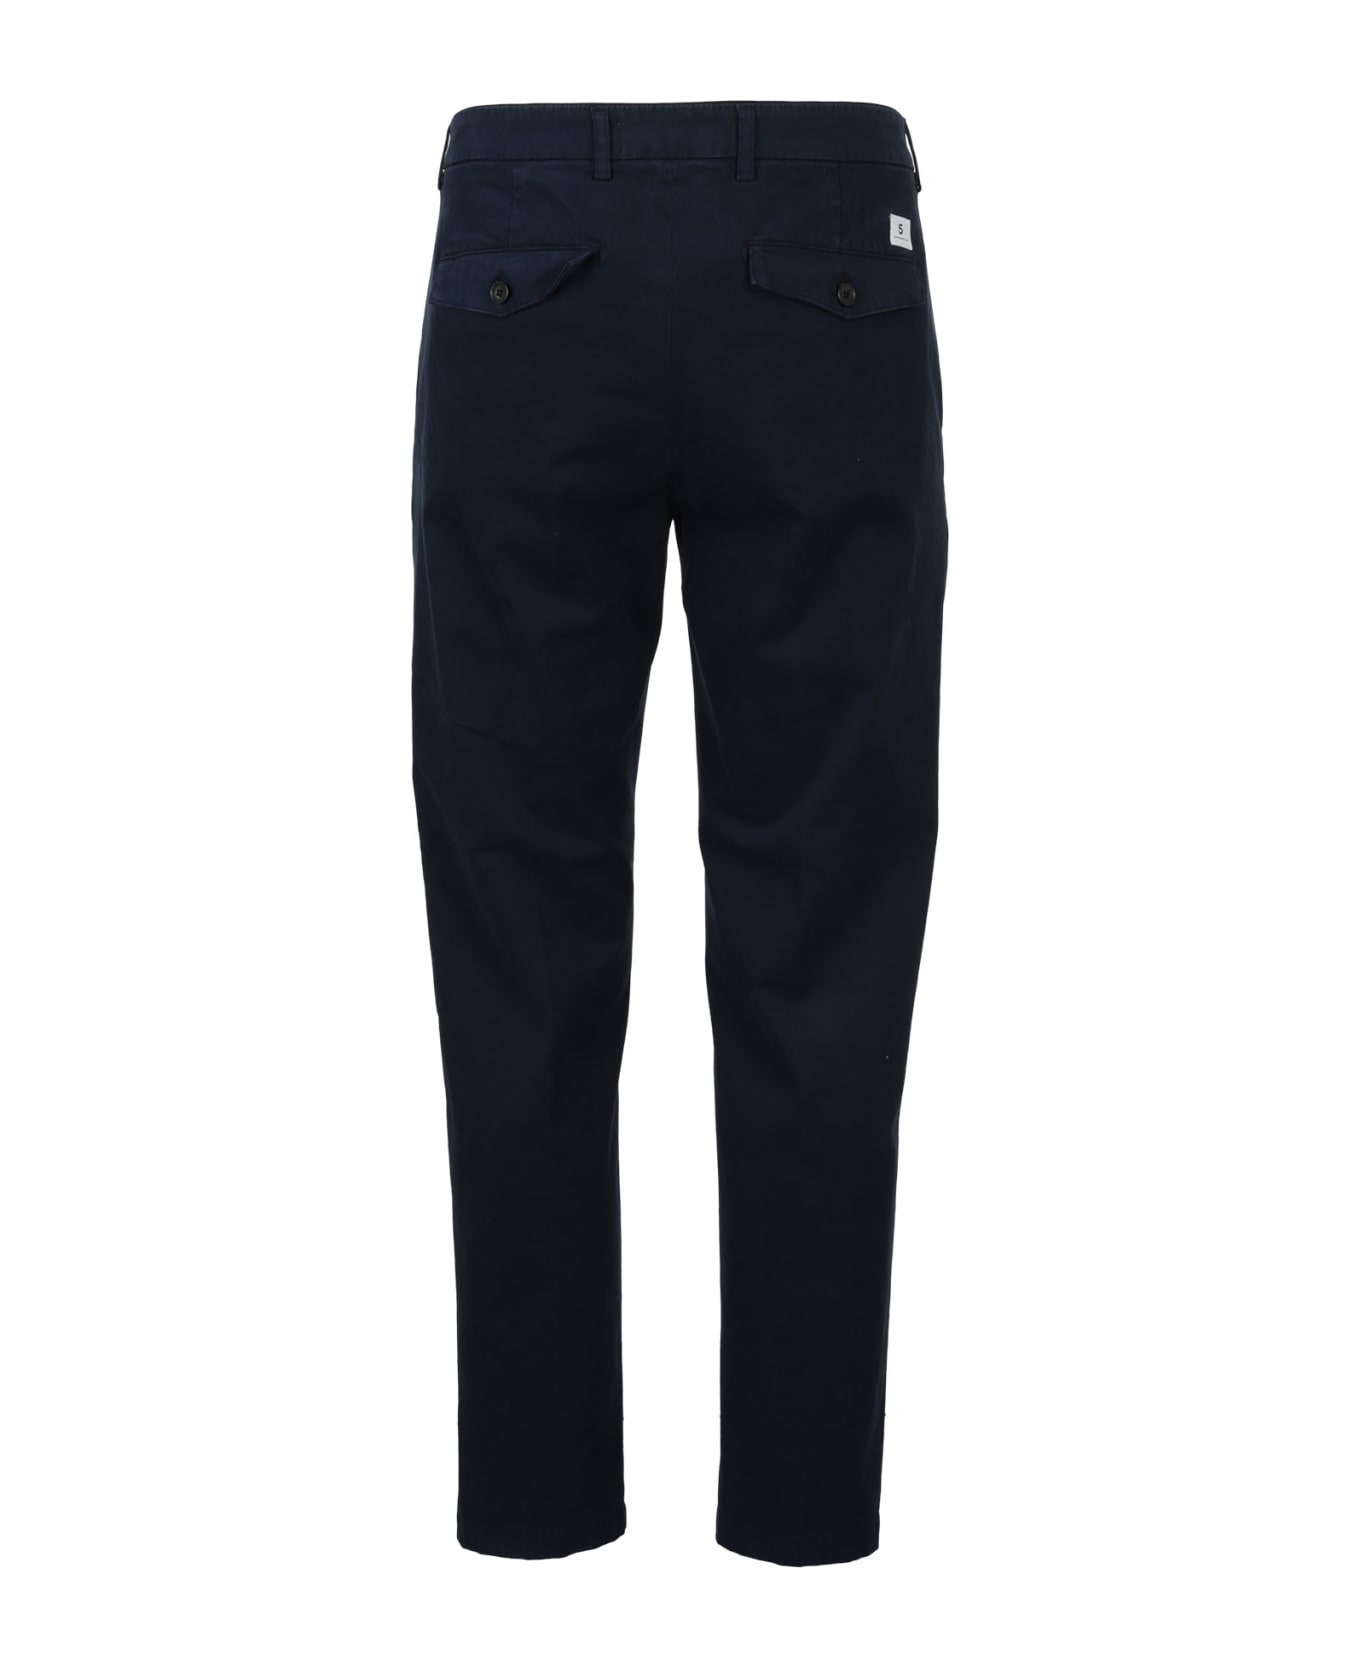 Department Five Prince Pences Chinos - Navy ボトムス